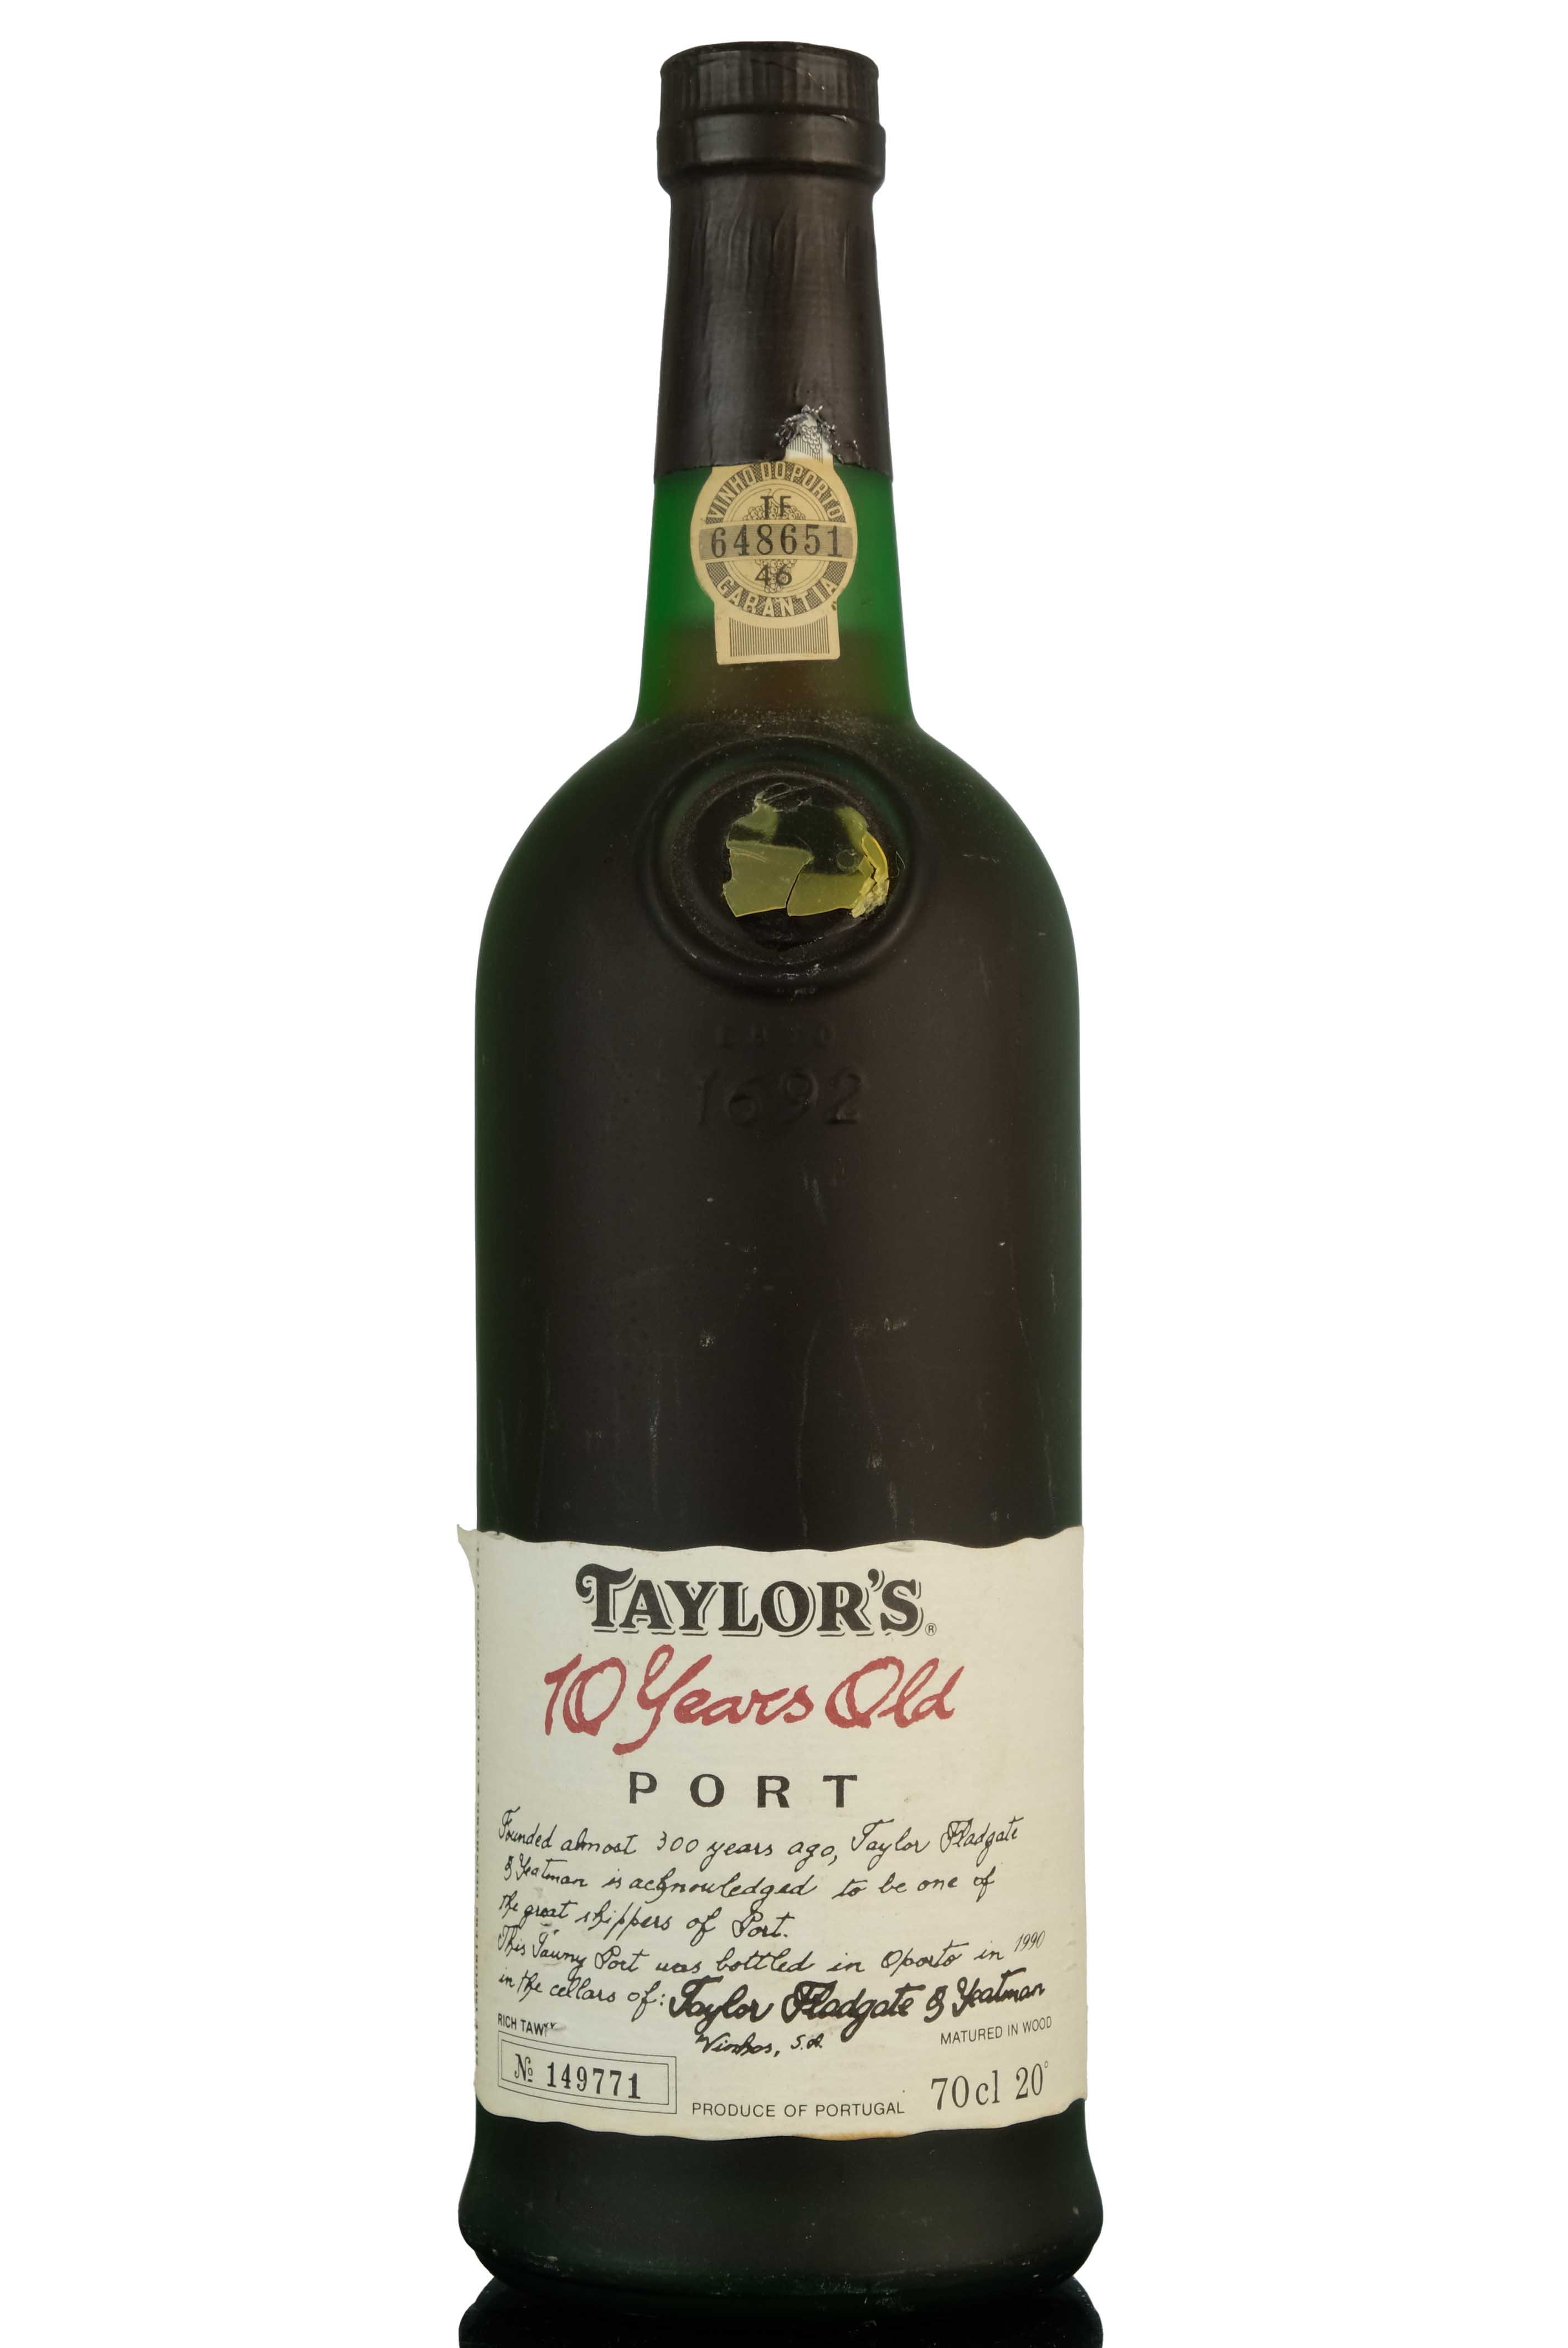 Taylors 10 Year Old Port